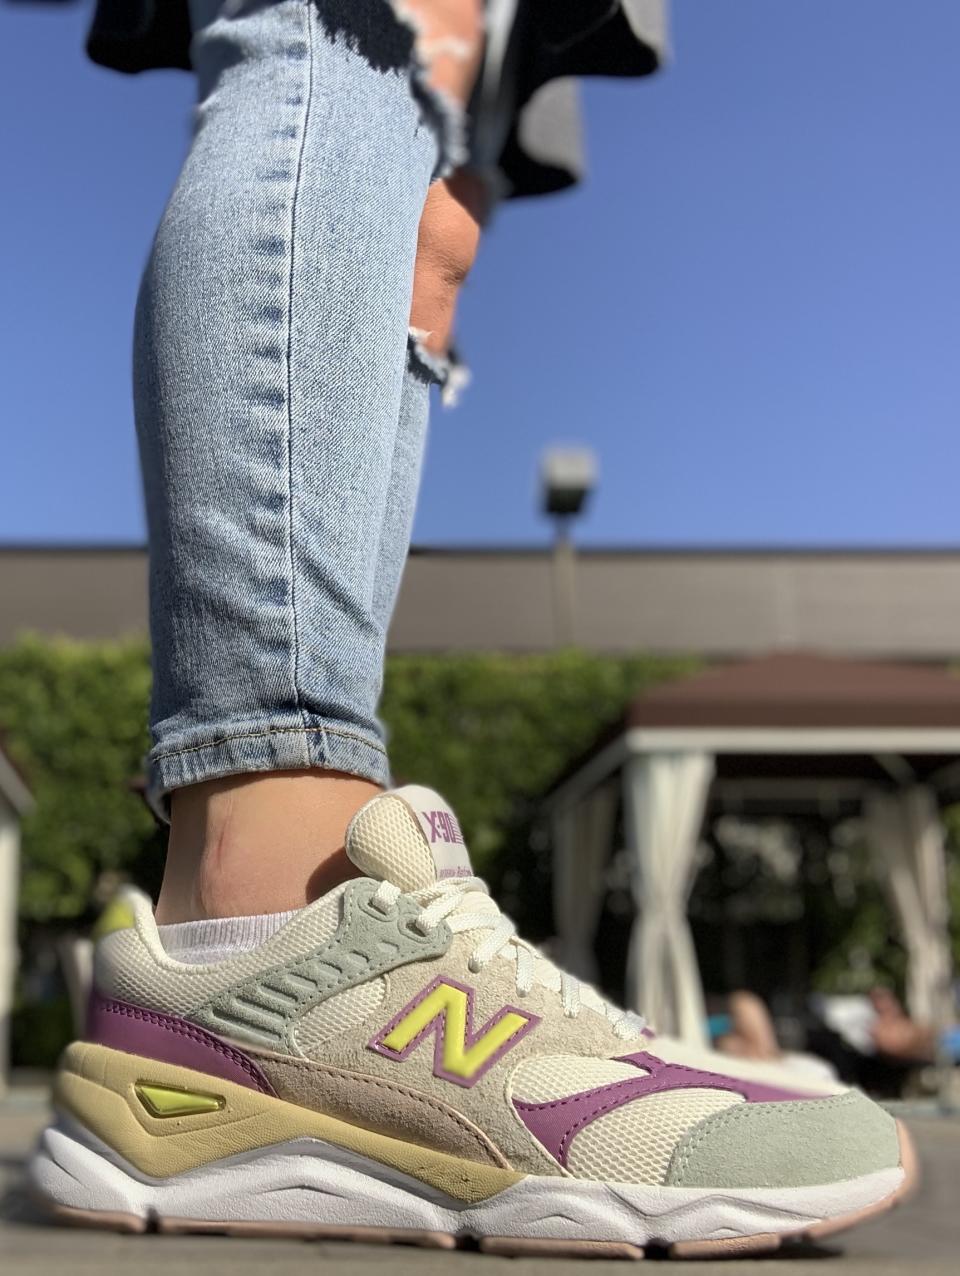 work from home shoes, new balance x reformation, sneakers